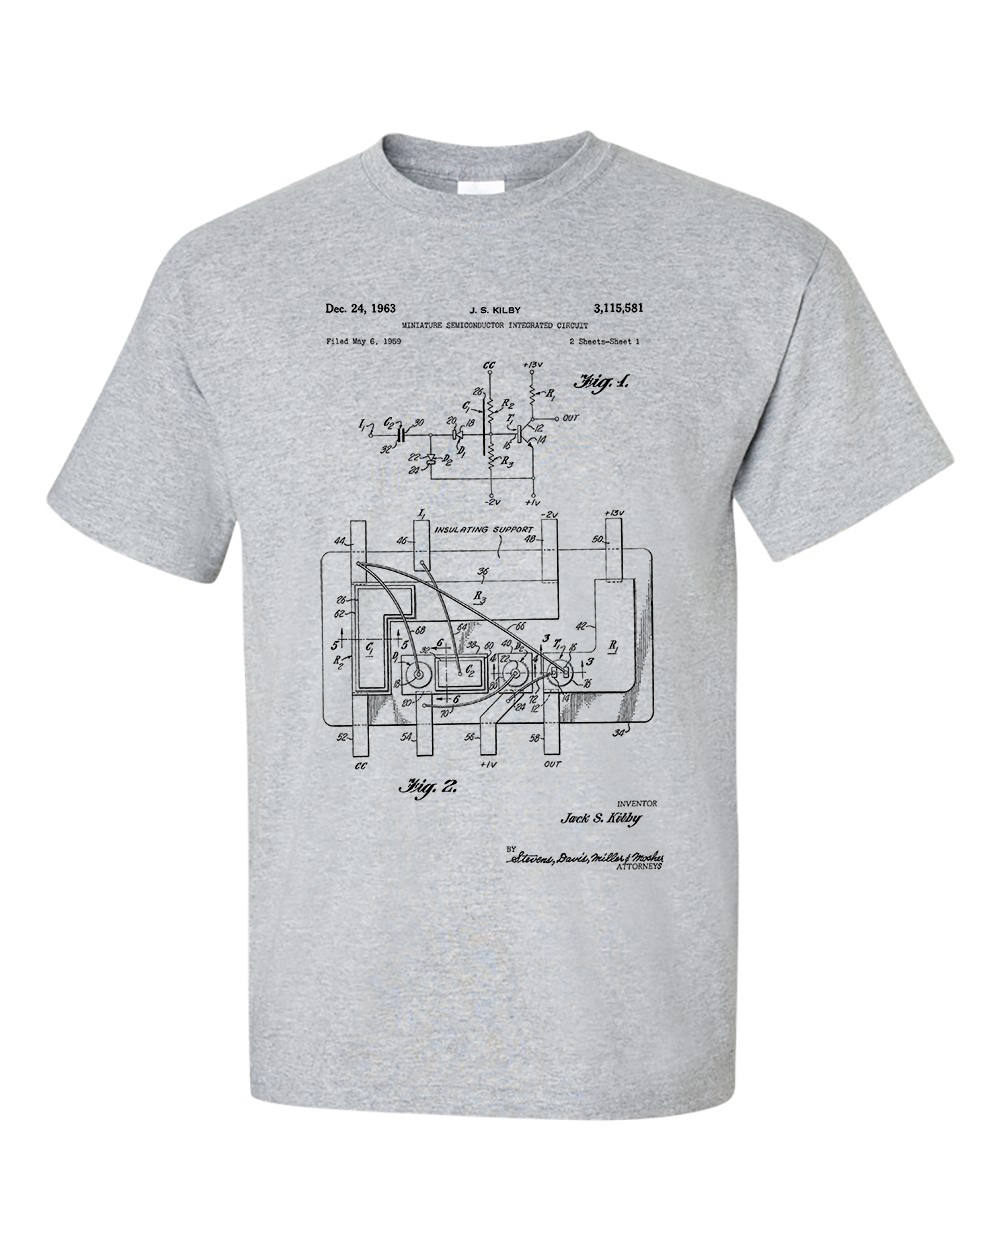 First Integrated Circuit Patent T-Shirt